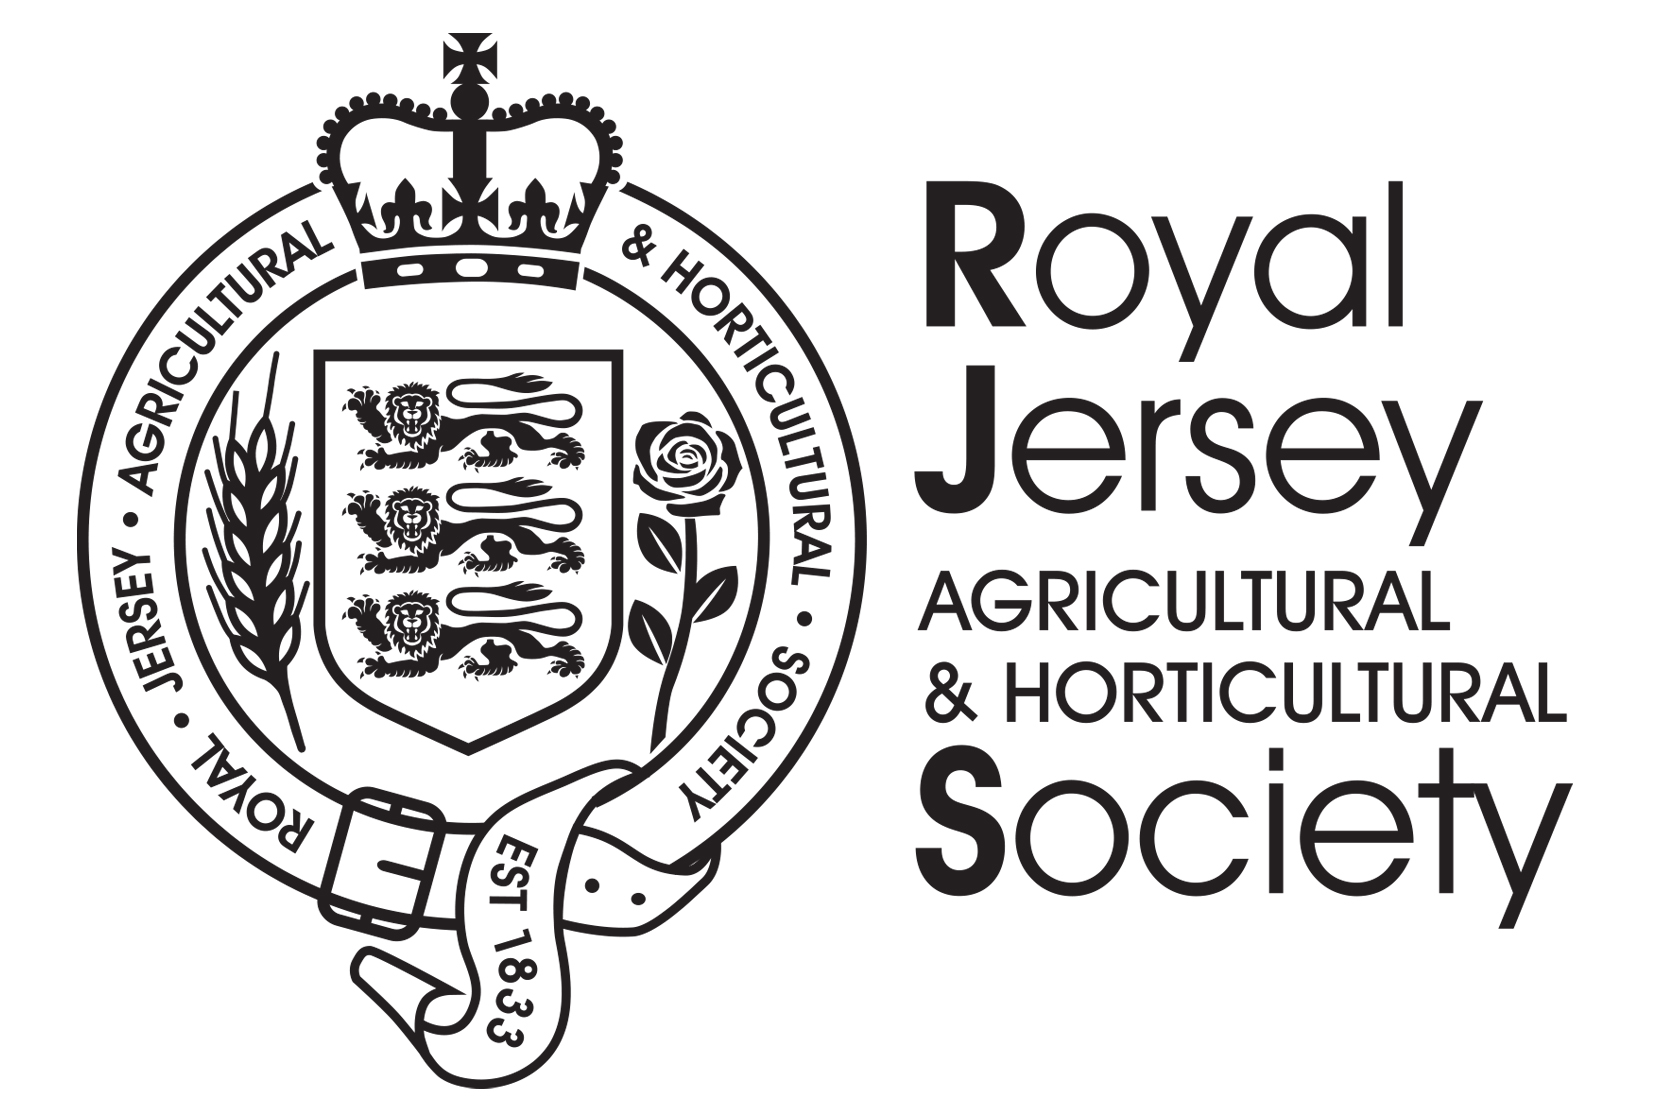 Royal Jersey Agricultural & Horticultural Society